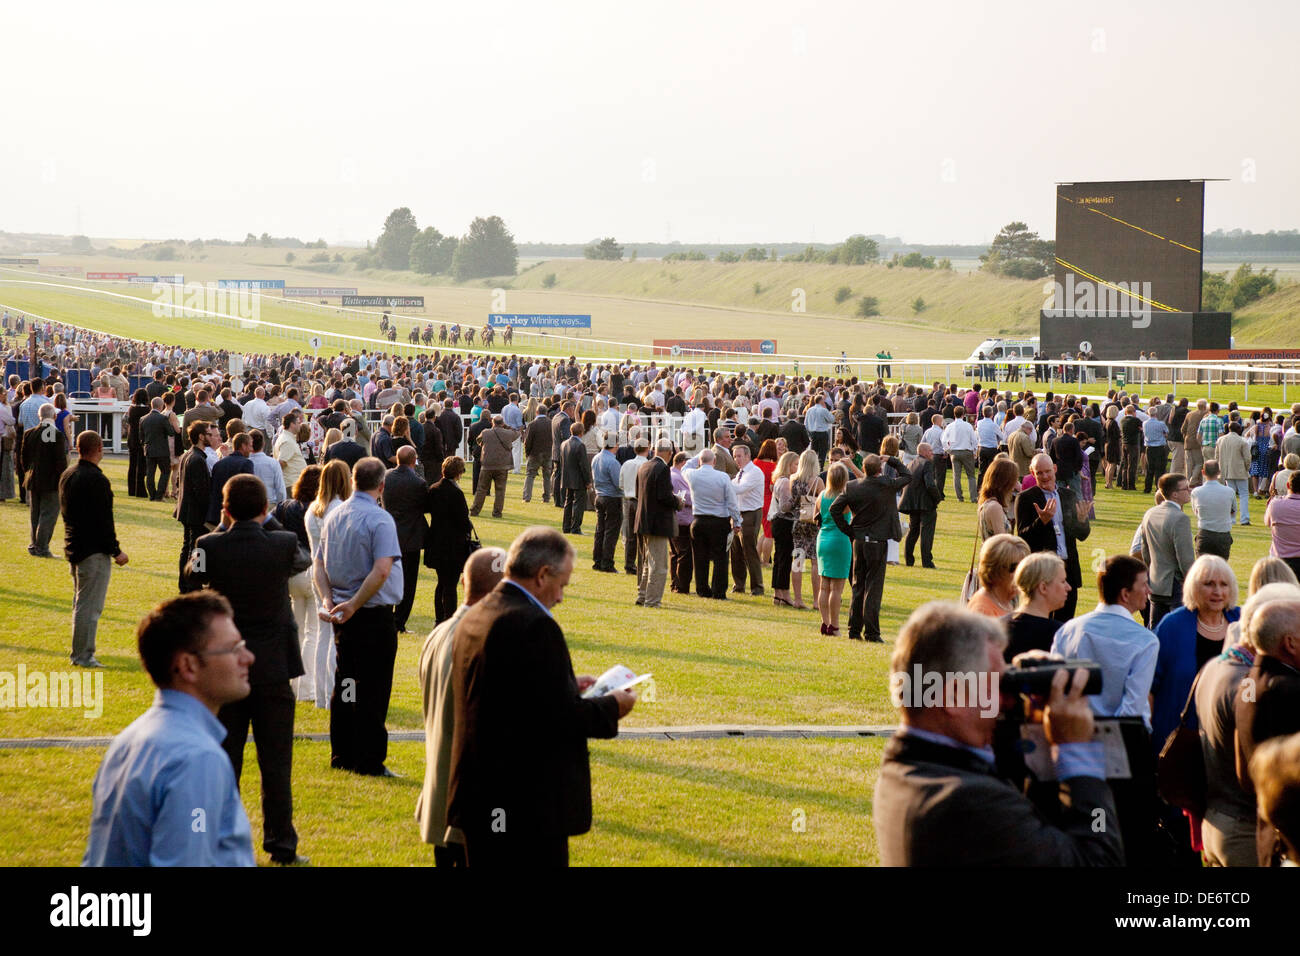 Horse racing crowd; People watching horse racing, The July Racecourse, Newmarket Suffolk UK Stock Photo